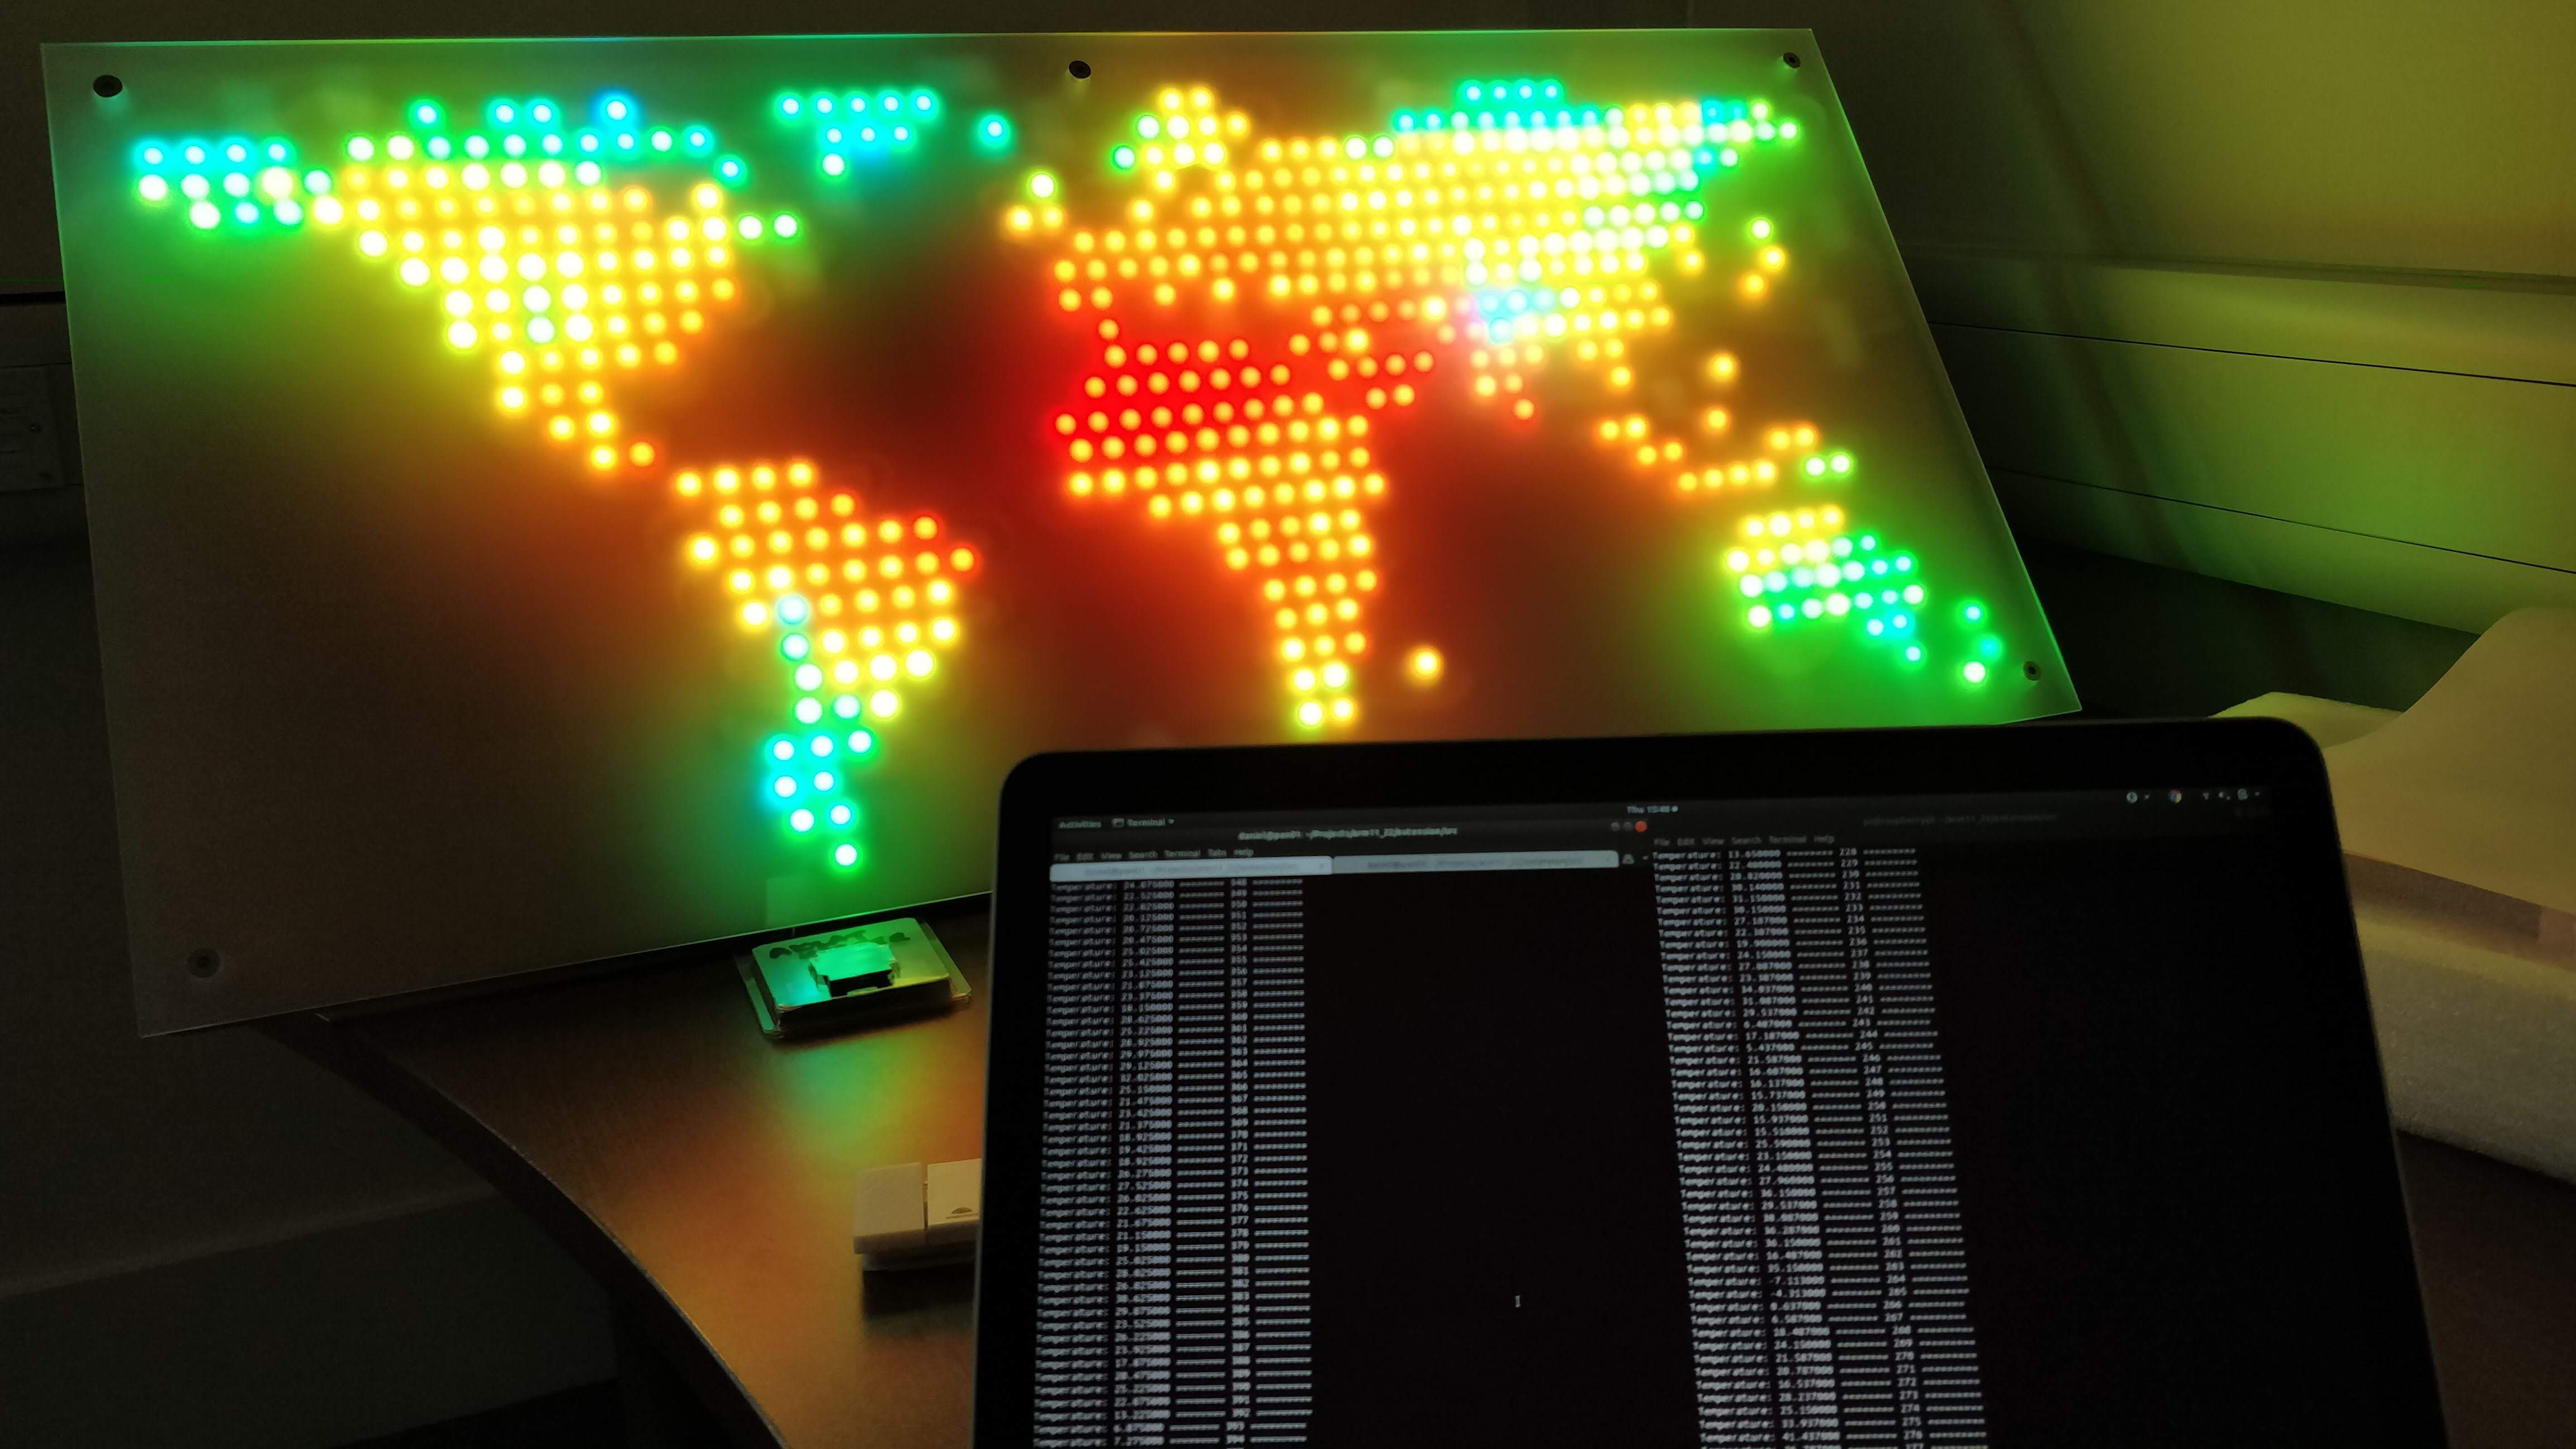 LED World Map showing real-time temperature ranges